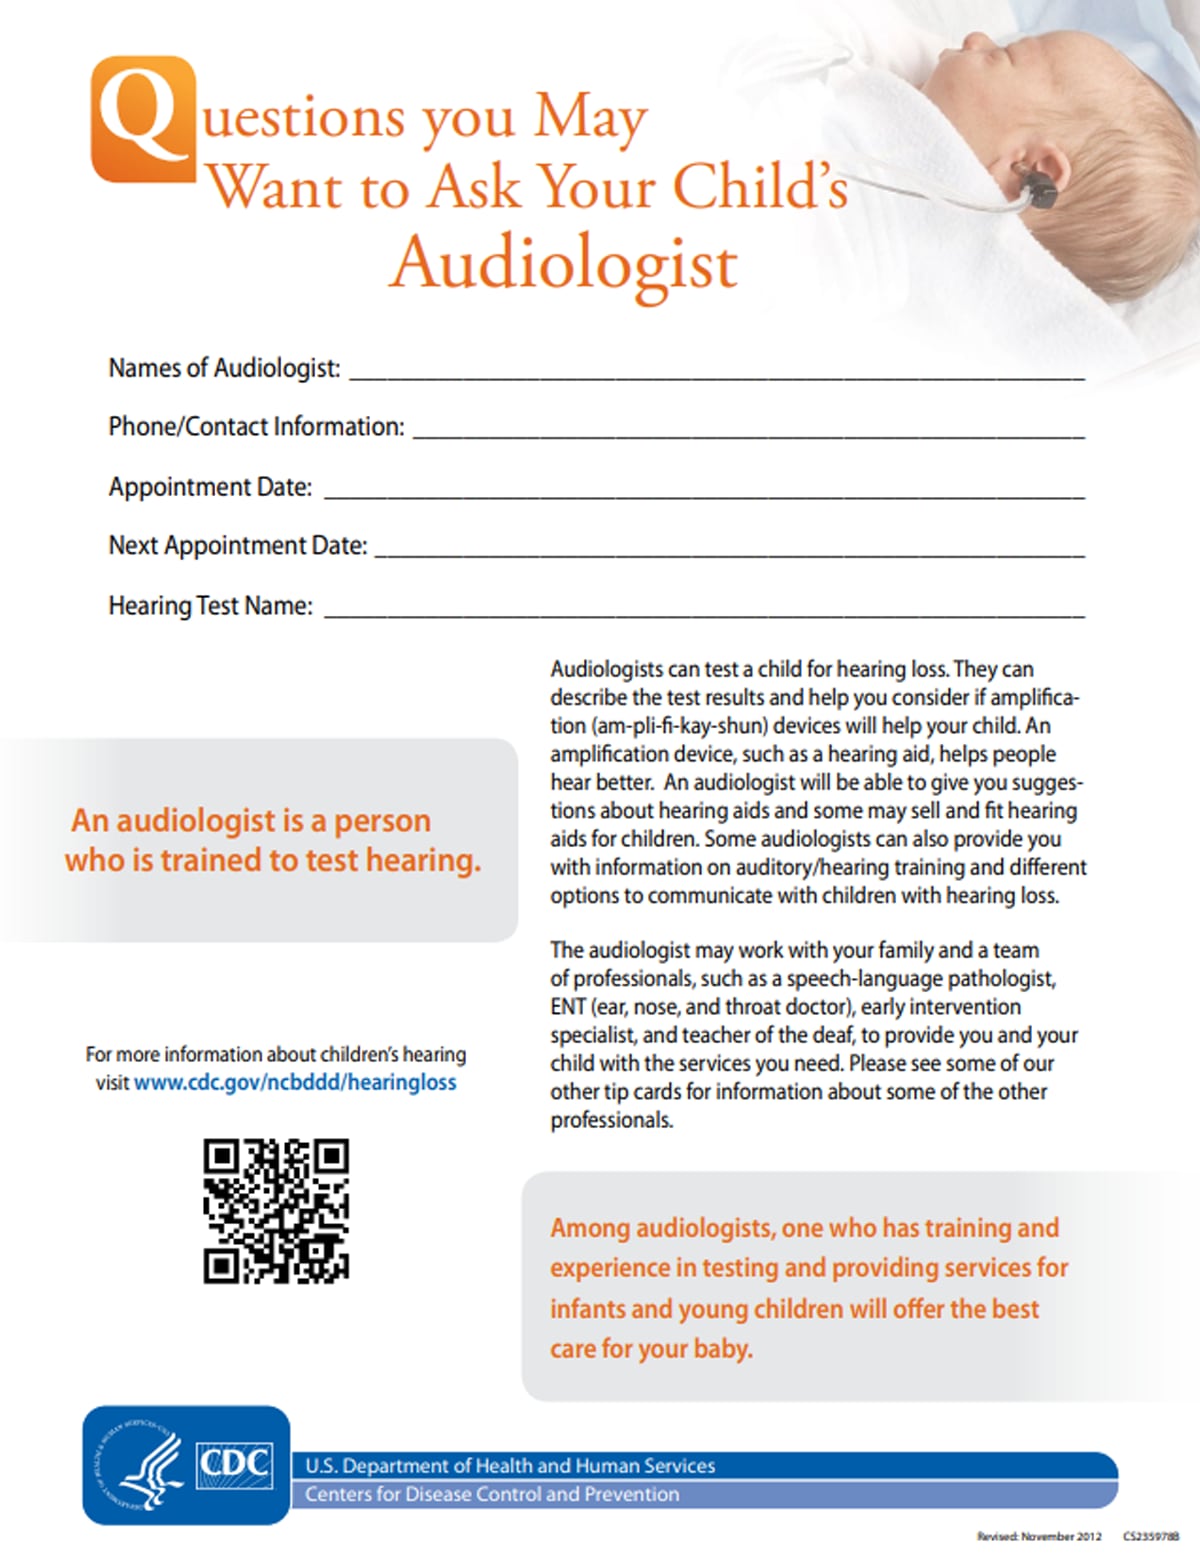 PDF Preview - questions you may want to ask audiologist